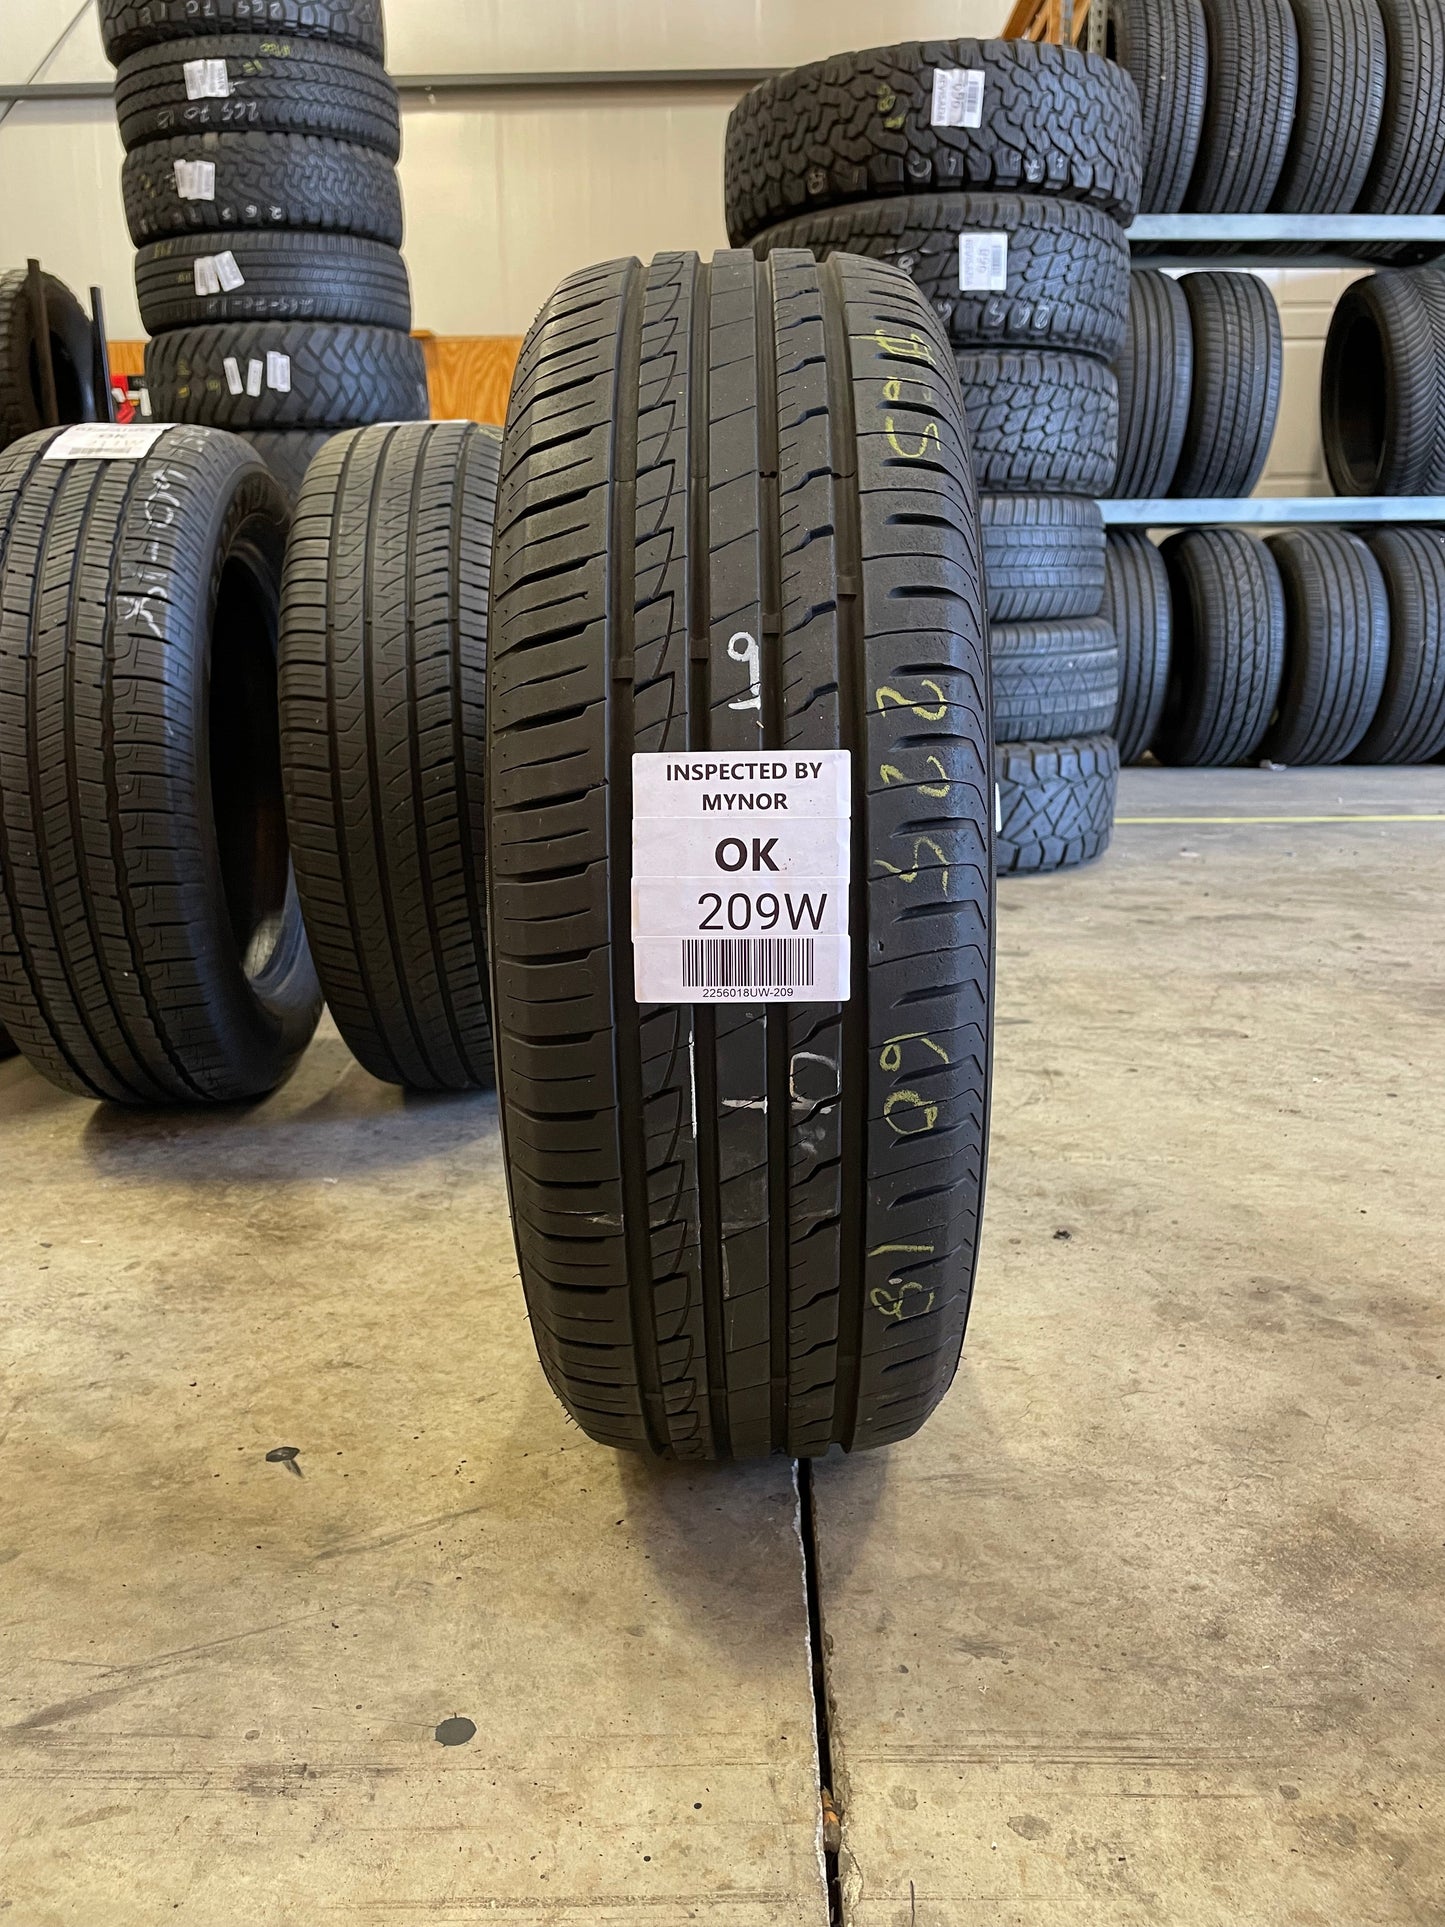 SINGLE 225/60R18 Ironman Imove Gen 2 AS 100 V SL - Used Tires